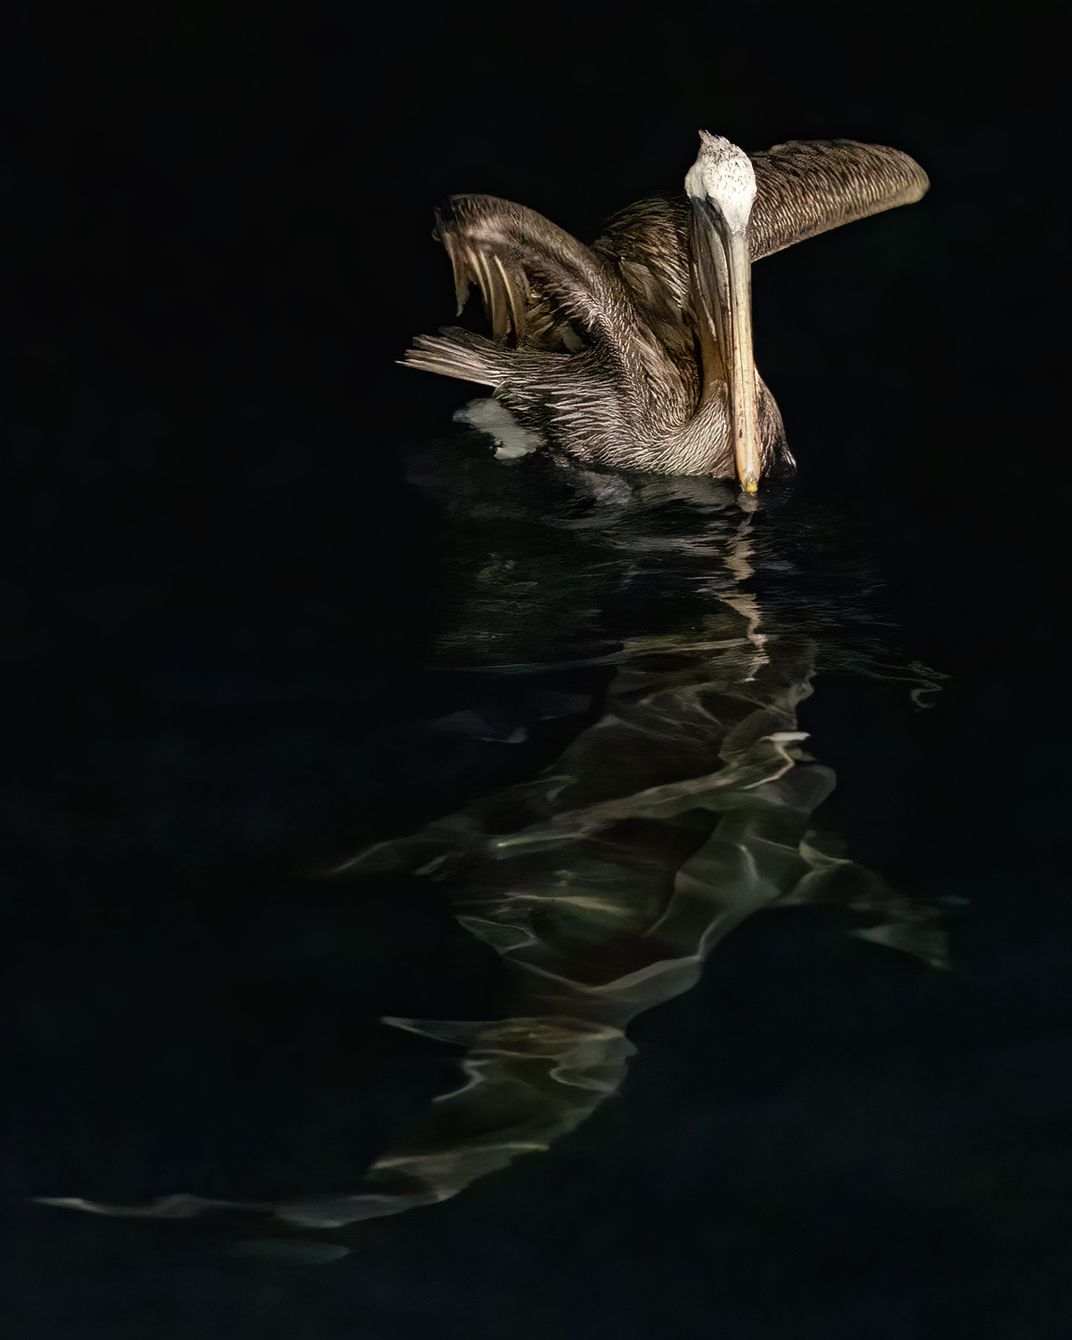 A Brown Pelican at the top of the frame sits in the water, its wings pulled behind its body. In the dark water below is the crescent silhouette of a shark, its snout nearly touching the pelican.